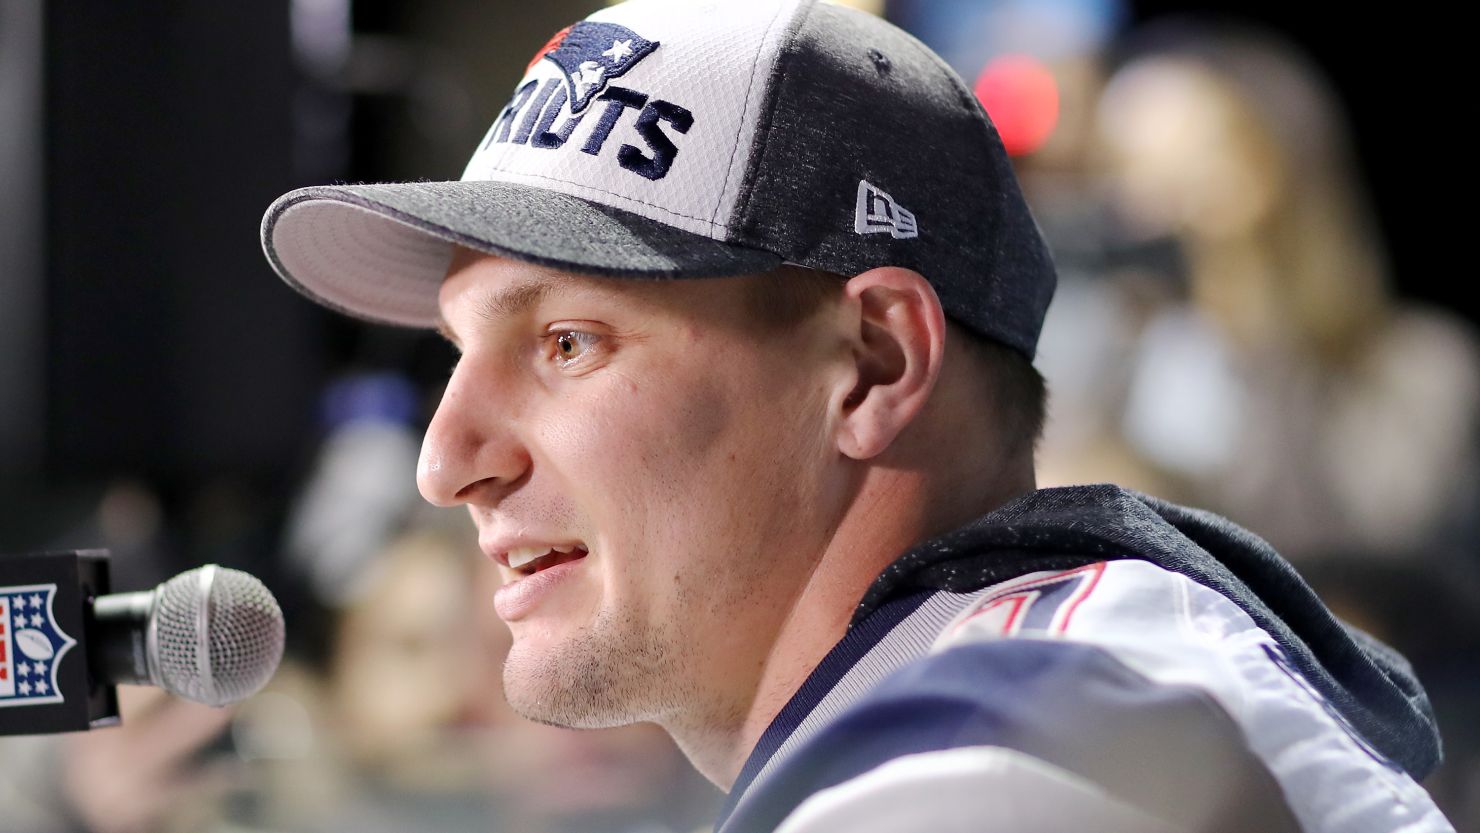 Rob Gronkowski says he knew "the whole time" that he would play on Sunday.